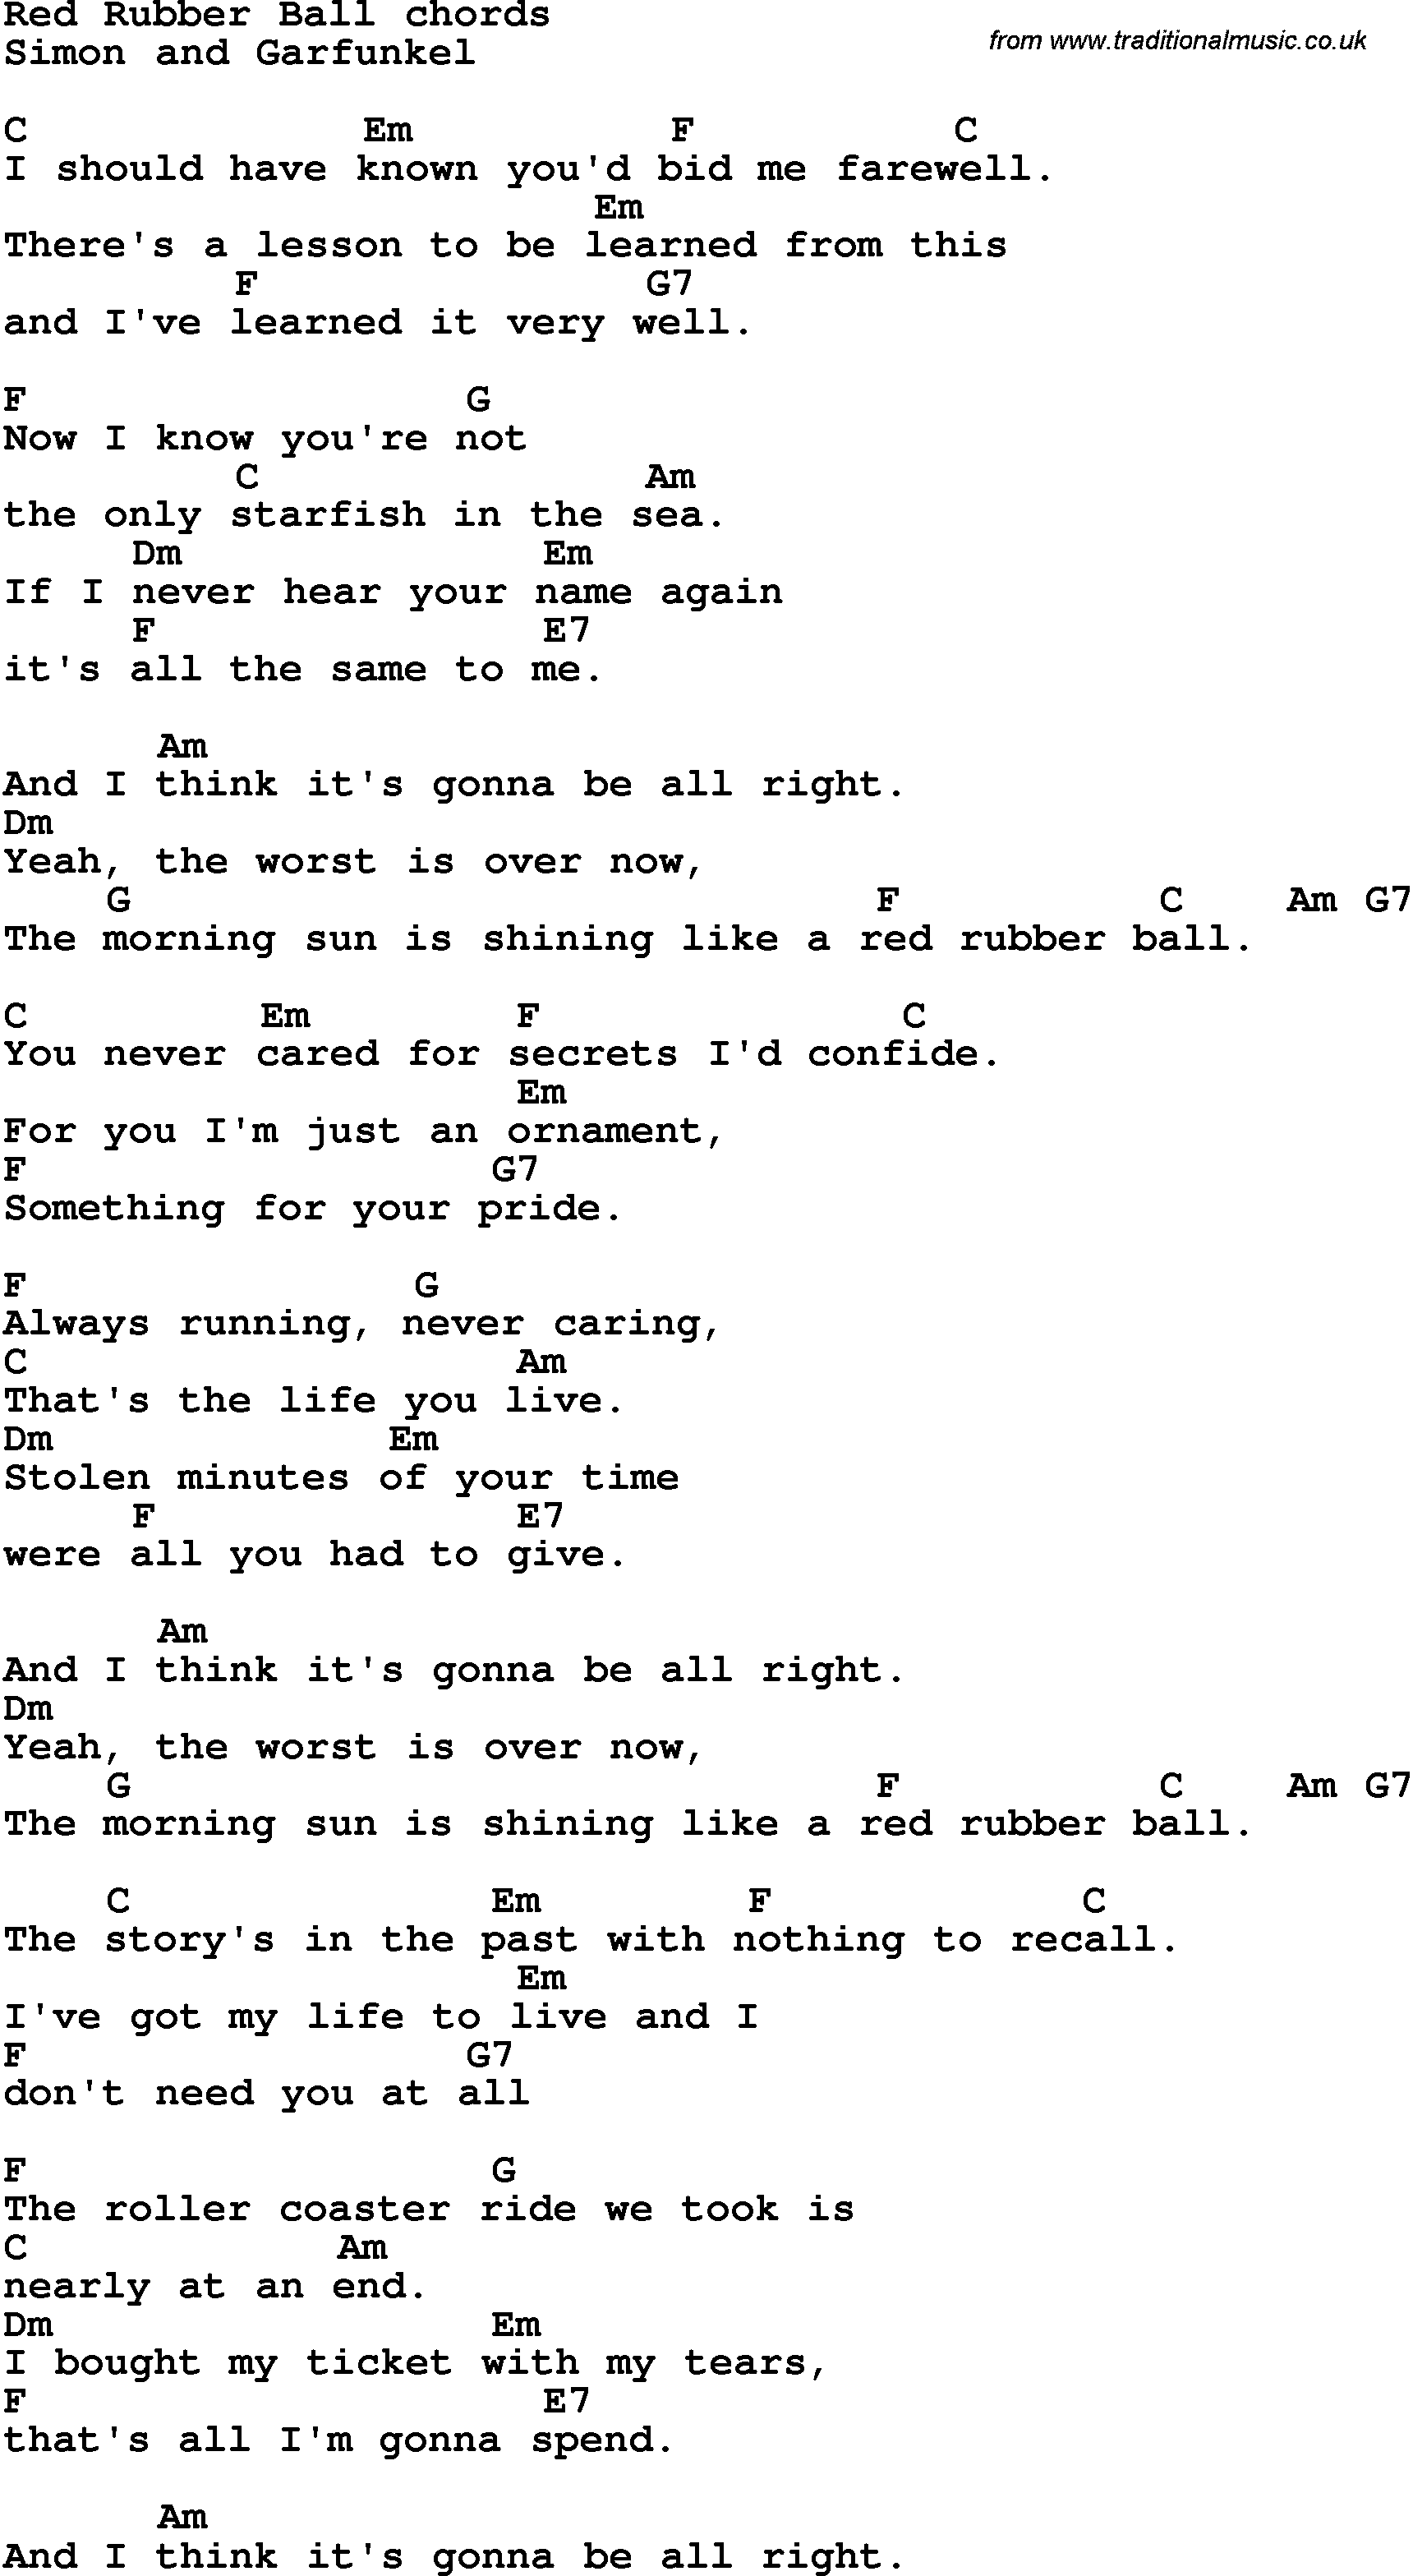 Song Lyrics with guitar chords for Red Rubber Ball